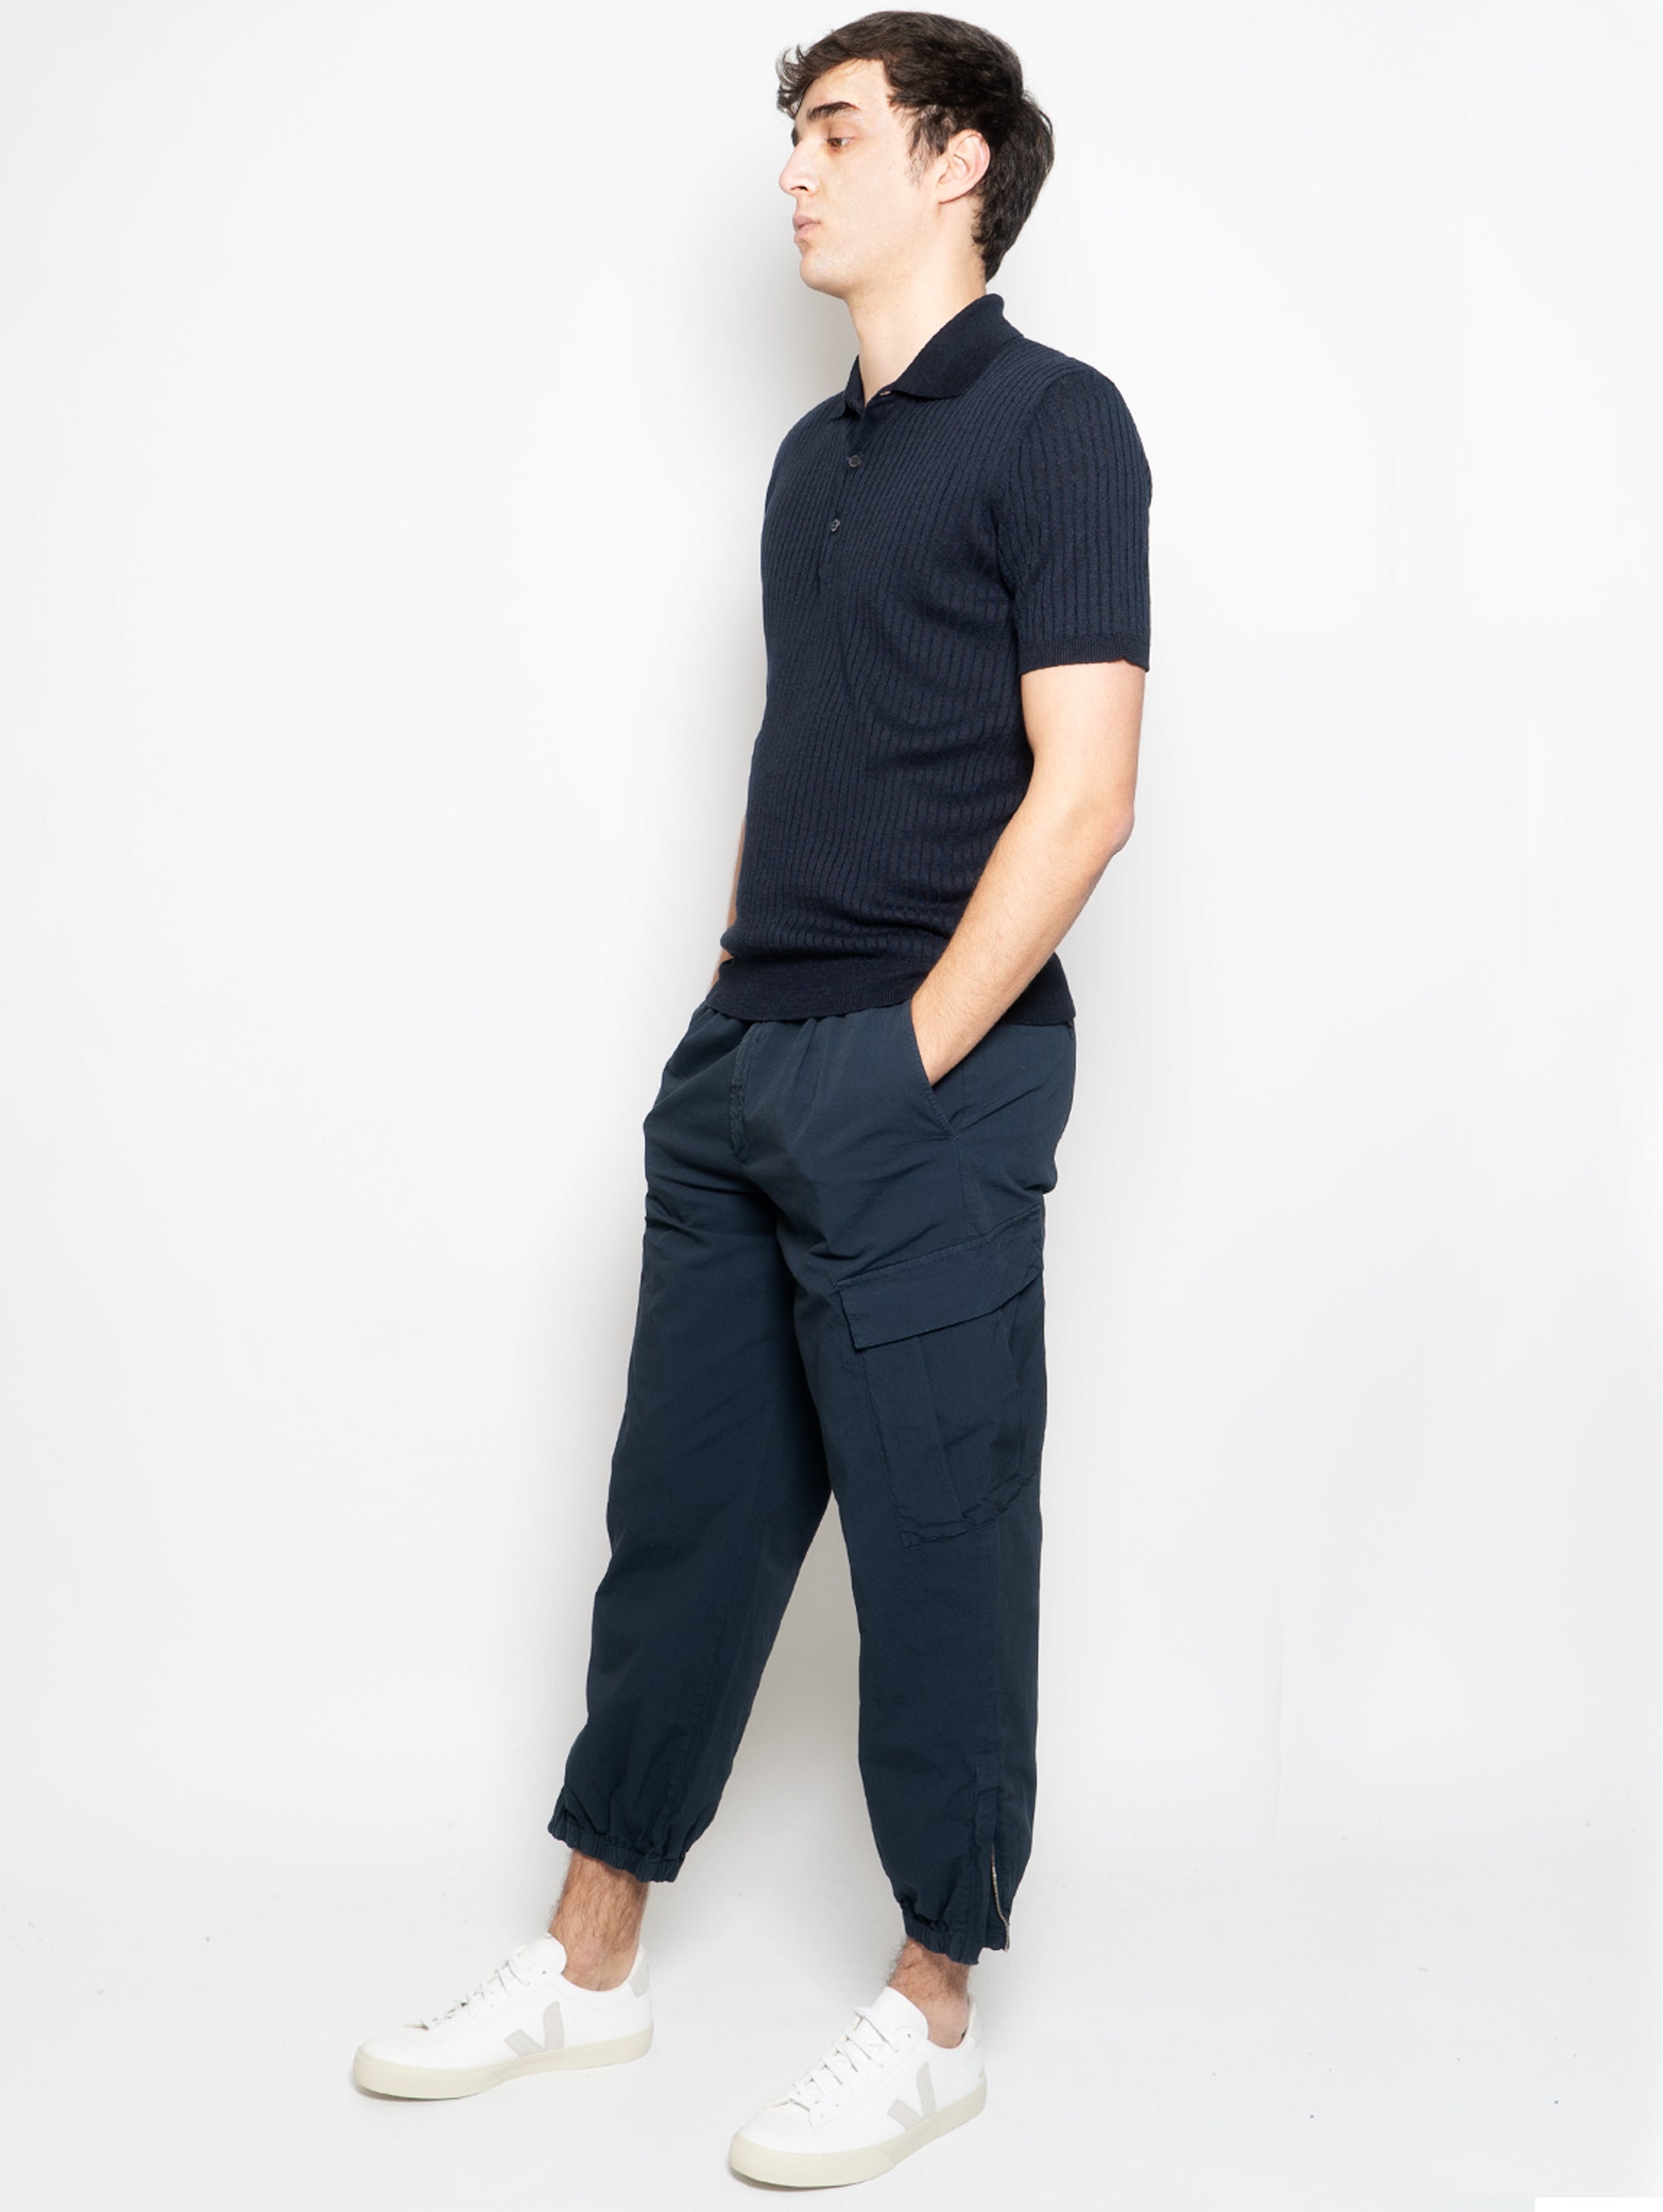 Cargo Pants with Blue Elastic